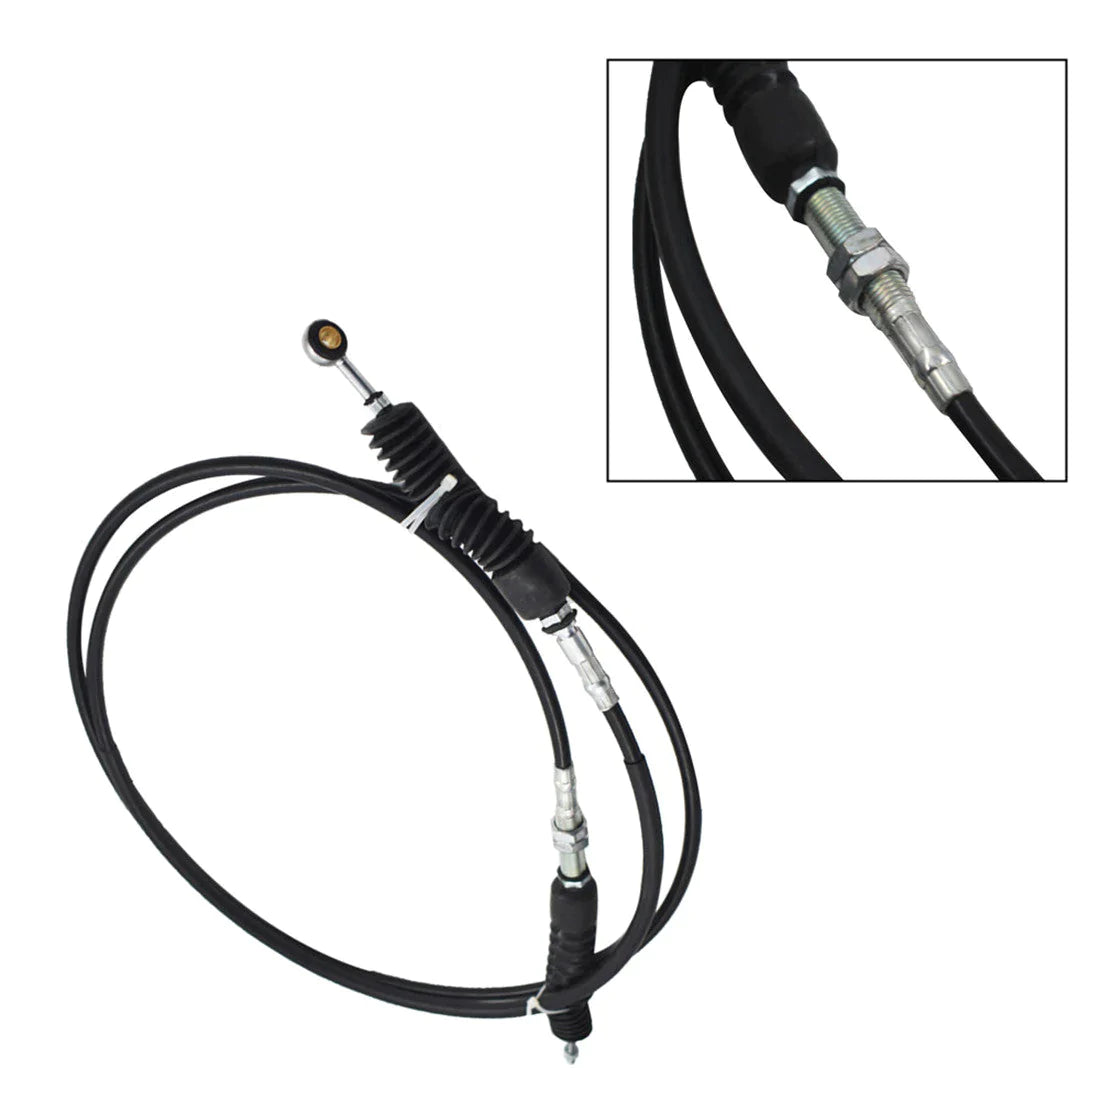 labwork Shift Control Cable 54010-1089 Fit for Kawasaki Mule 2500 2510 2520 Forward Reverse 1993-2002 LAB WORK MOTO